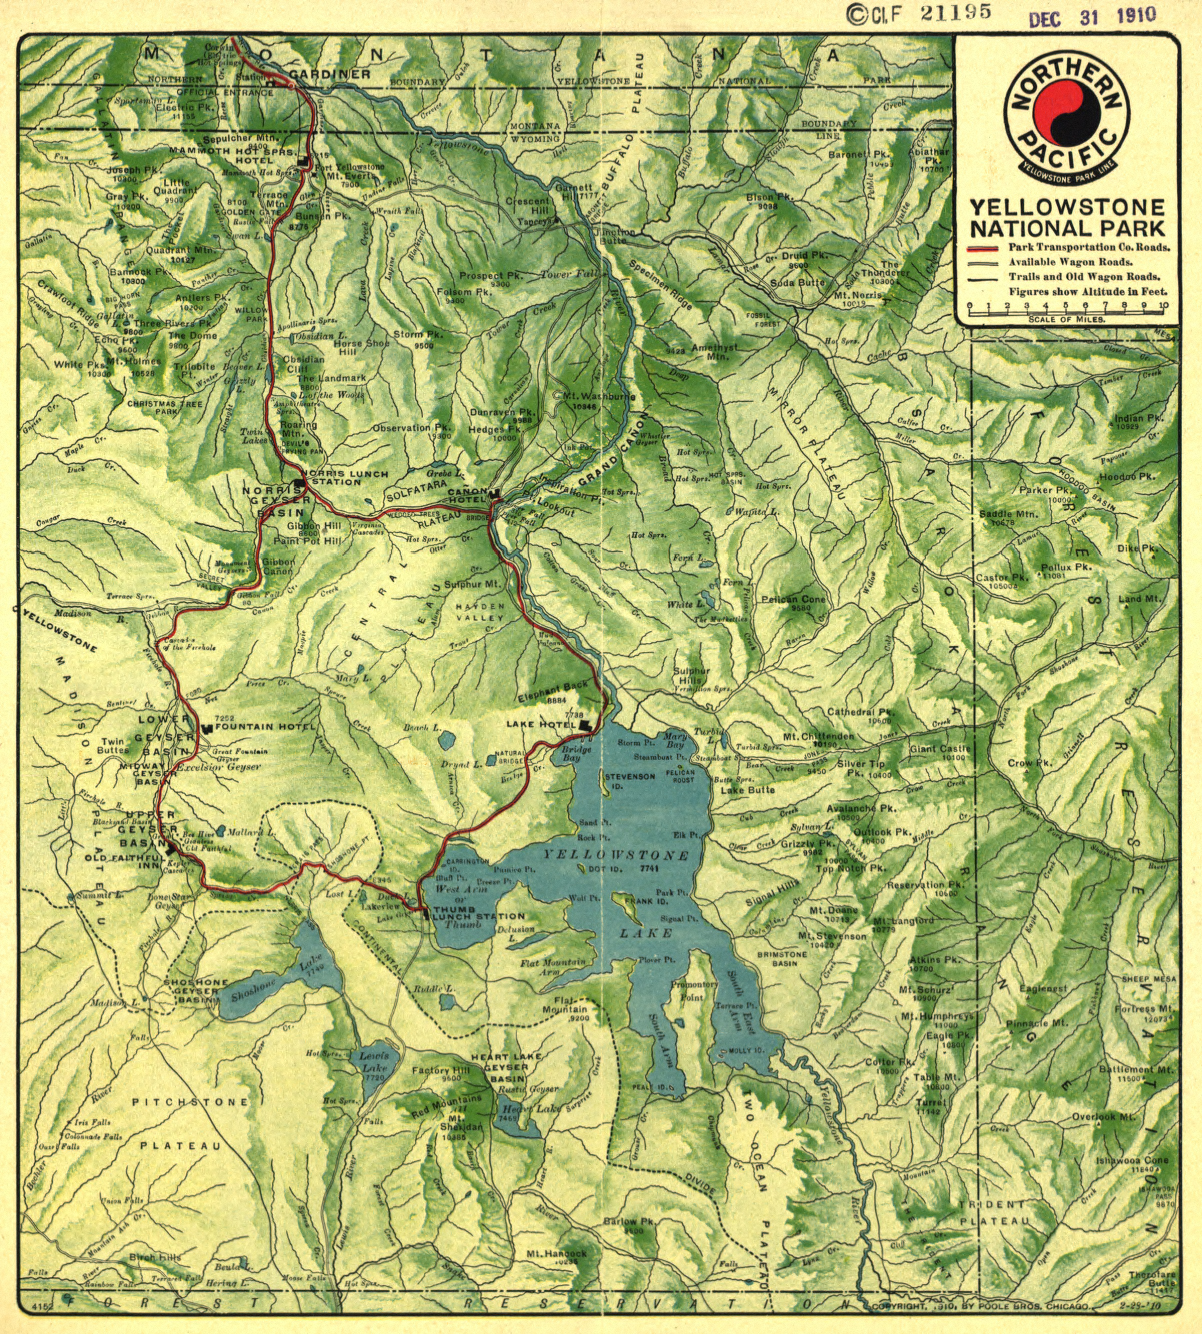 Yellowstone National Park 1910 Northern Pacific Map from the Library of Congress Collection